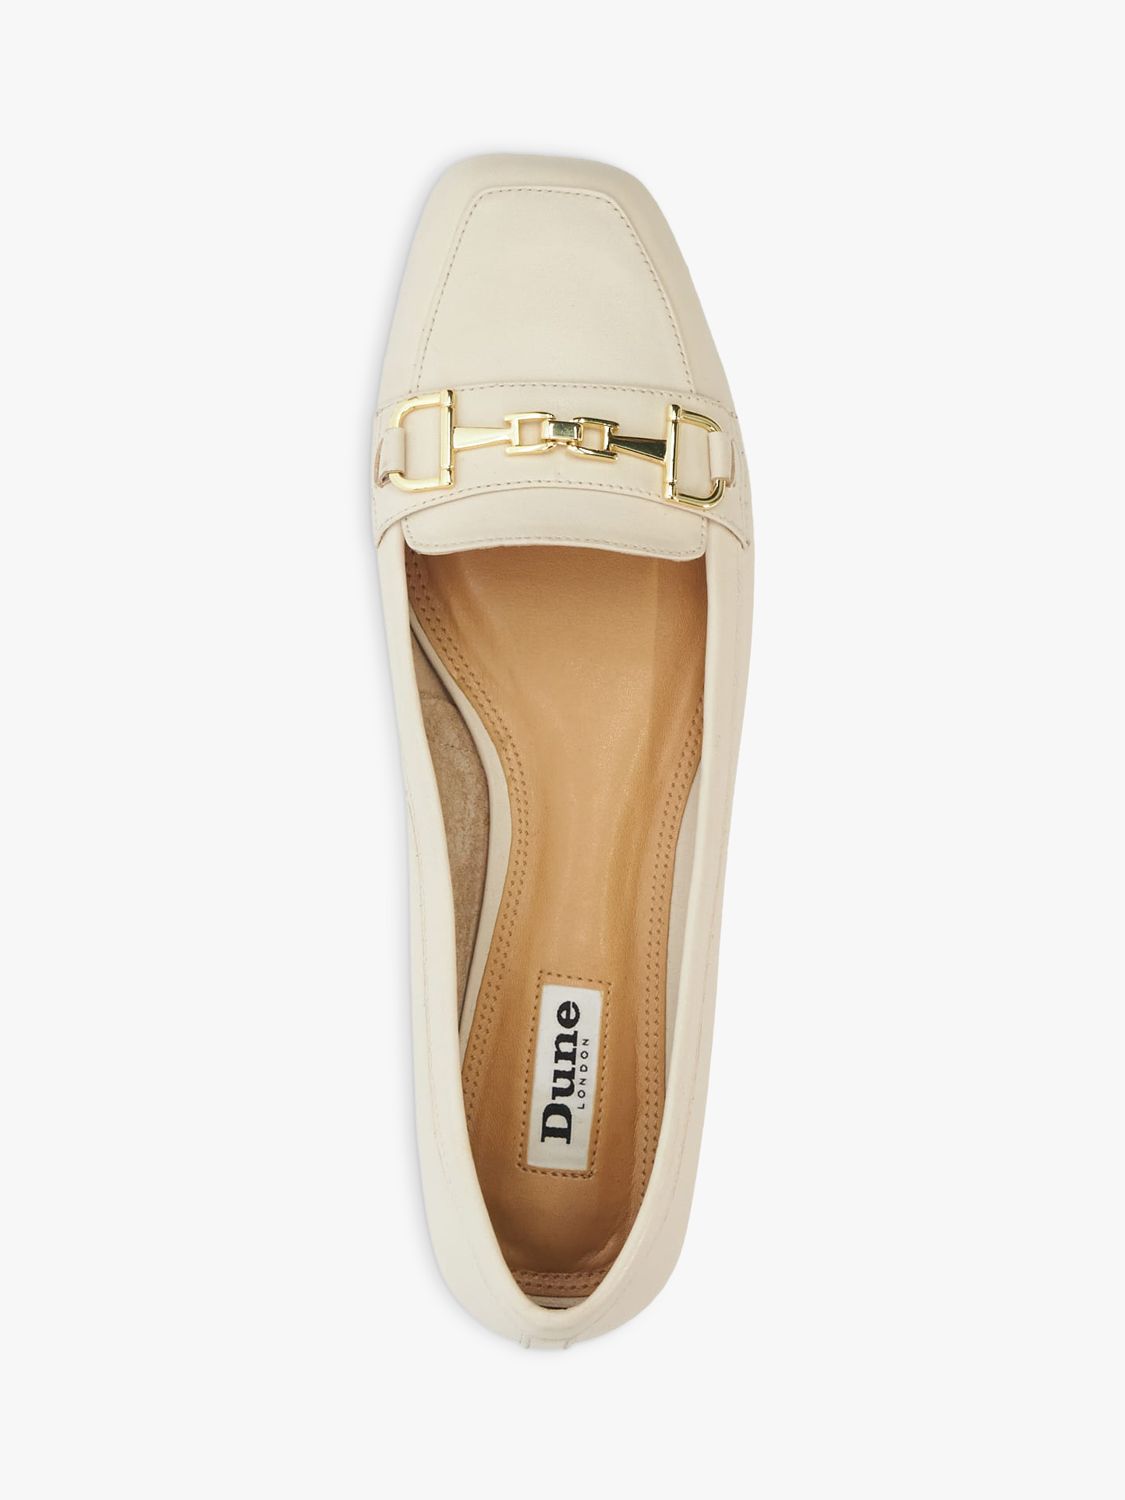 Buy Dune Graice Snaffle Trim Leather Loafers Online at johnlewis.com